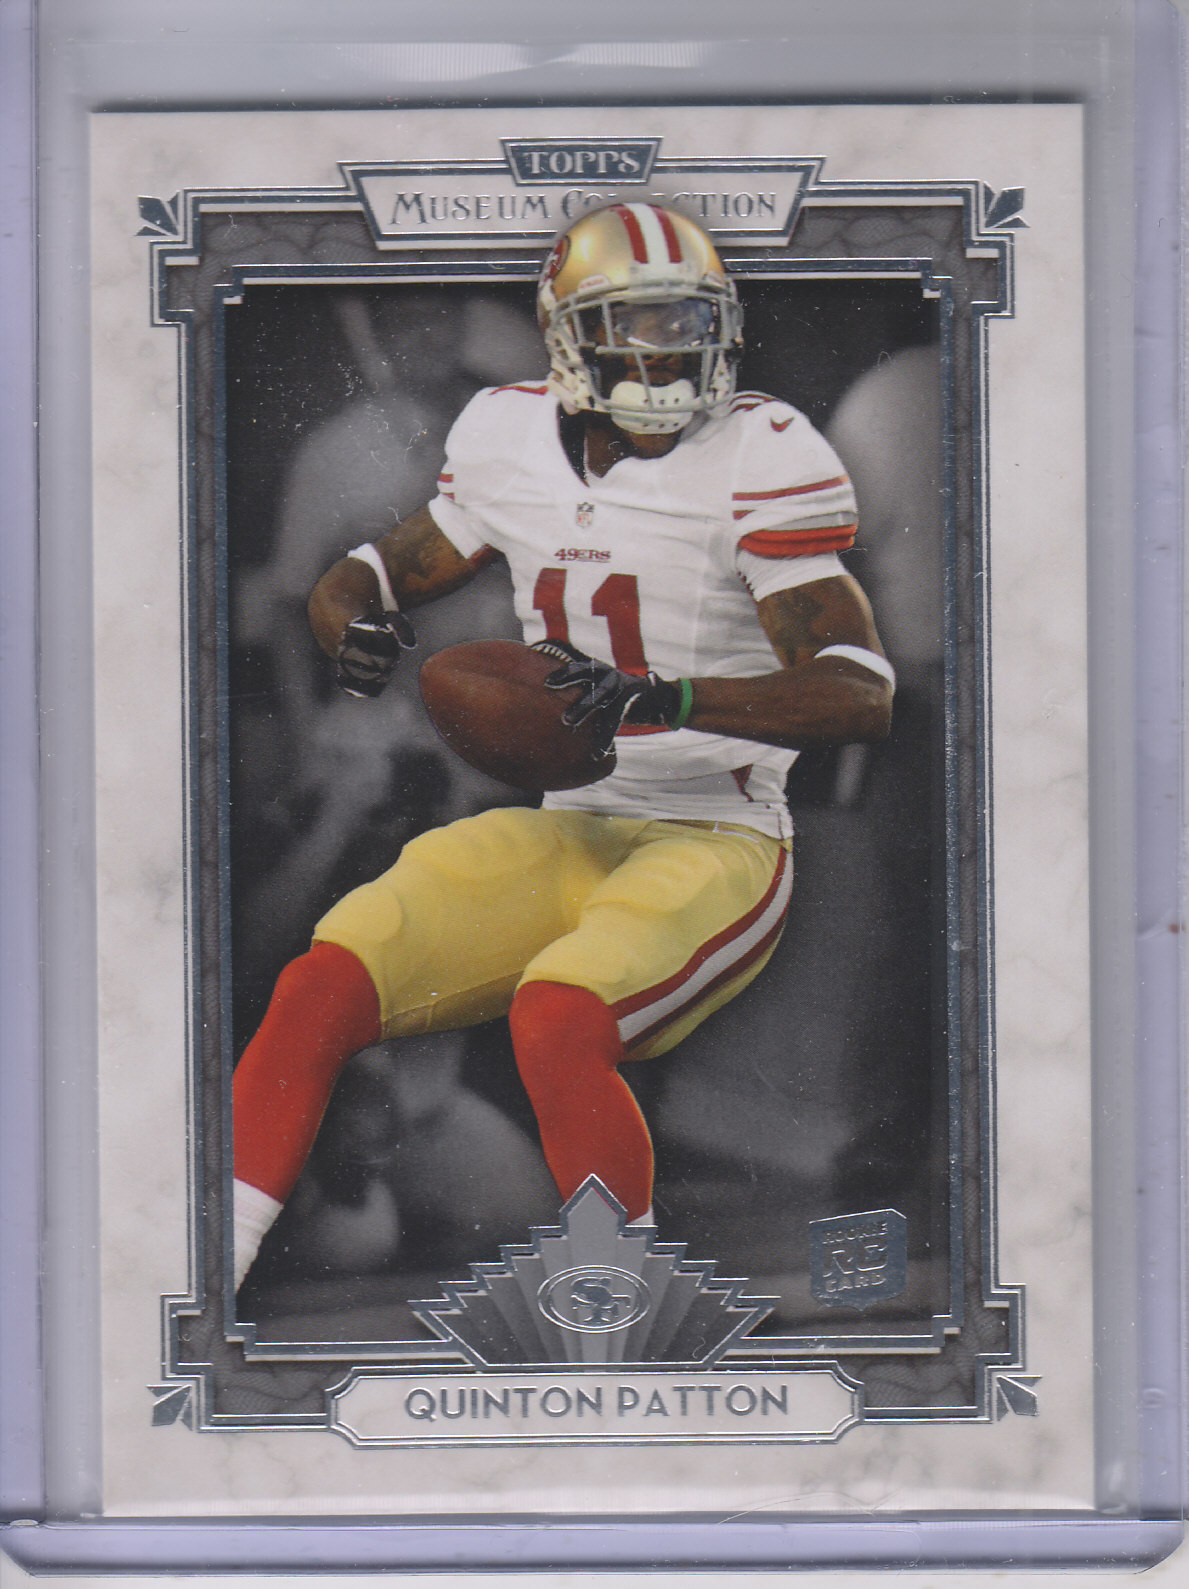 2013 Topps Museum Collection #20 Quinton Patton RC